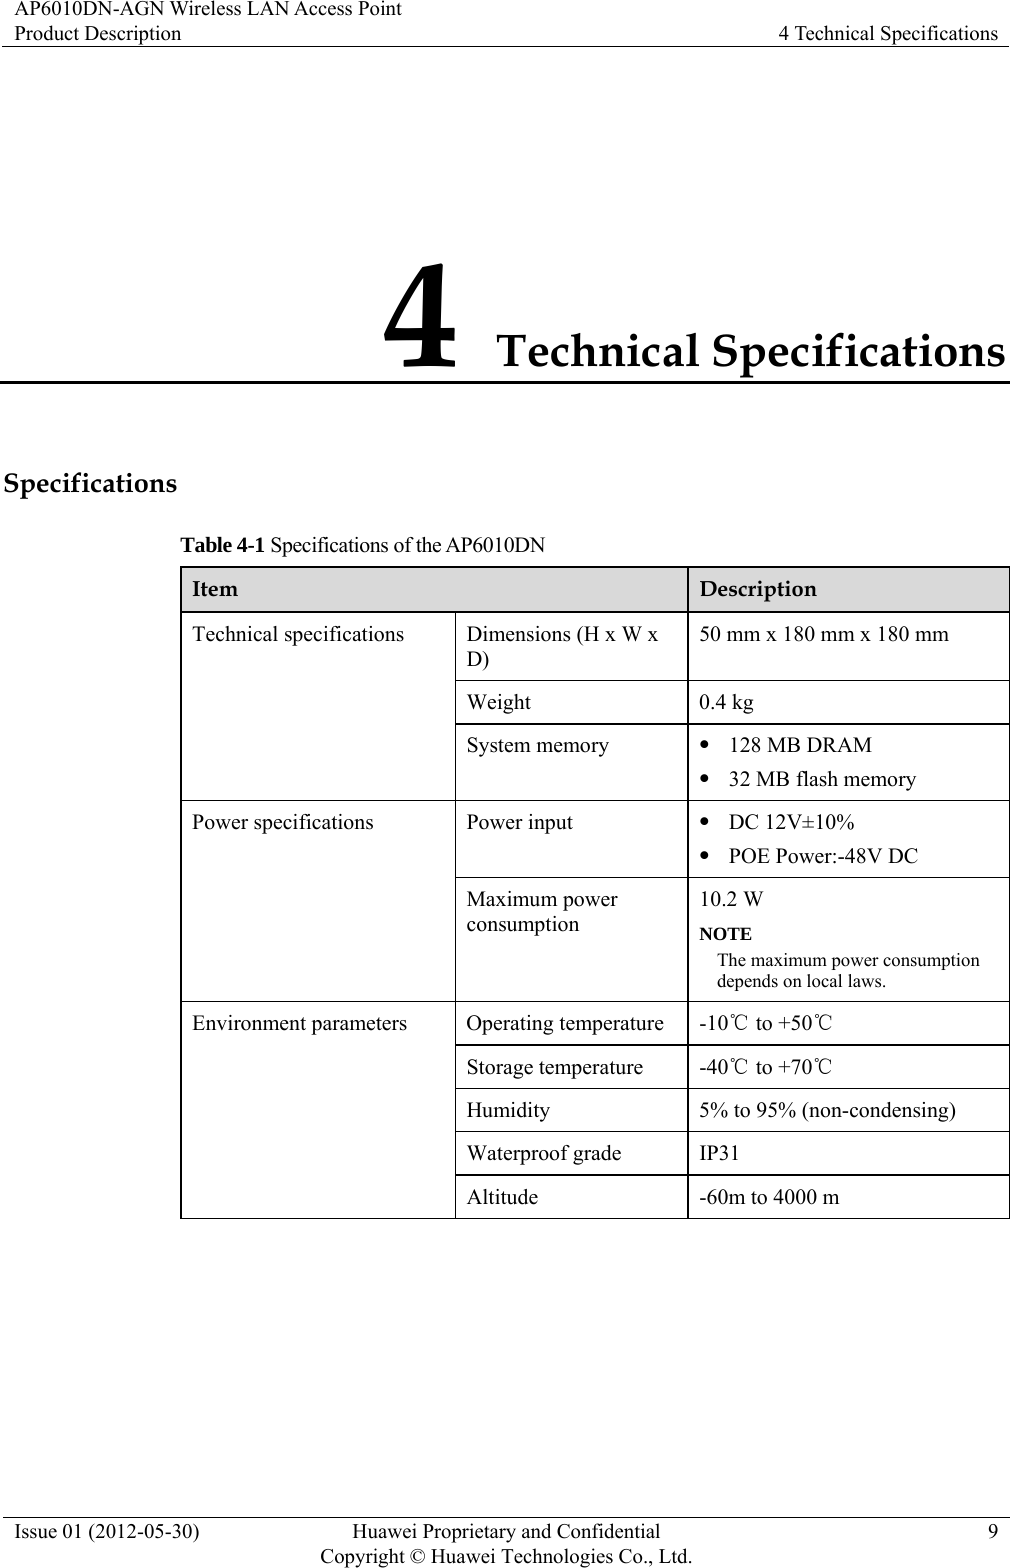 AP6010DN-AGN Wireless LAN Access Point Product Description  4 Technical Specifications Issue 01 (2012-05-30)  Huawei Proprietary and Confidential         Copyright © Huawei Technologies Co., Ltd.9 4 Technical Specifications Specifications Table 4-1 Specifications of the AP6010DN Item  Description Technical specifications  Dimensions (H x W x D) 50 mm x 180 mm x 180 mm Weight 0.4 kg System memory  z 128 MB DRAM z 32 MB flash memory Power specifications  Power input  z DC 12V±10% z POE Power:-48V DC Maximum power consumption 10.2 W NOTE The maximum power consumption depends on local laws. Environment parameters  Operating temperature  -10  to +℃50℃ Storage temperature  -40  to +70℃℃ Humidity  5% to 95% (non-condensing) Waterproof grade  IP31 Altitude  -60m to 4000 m  